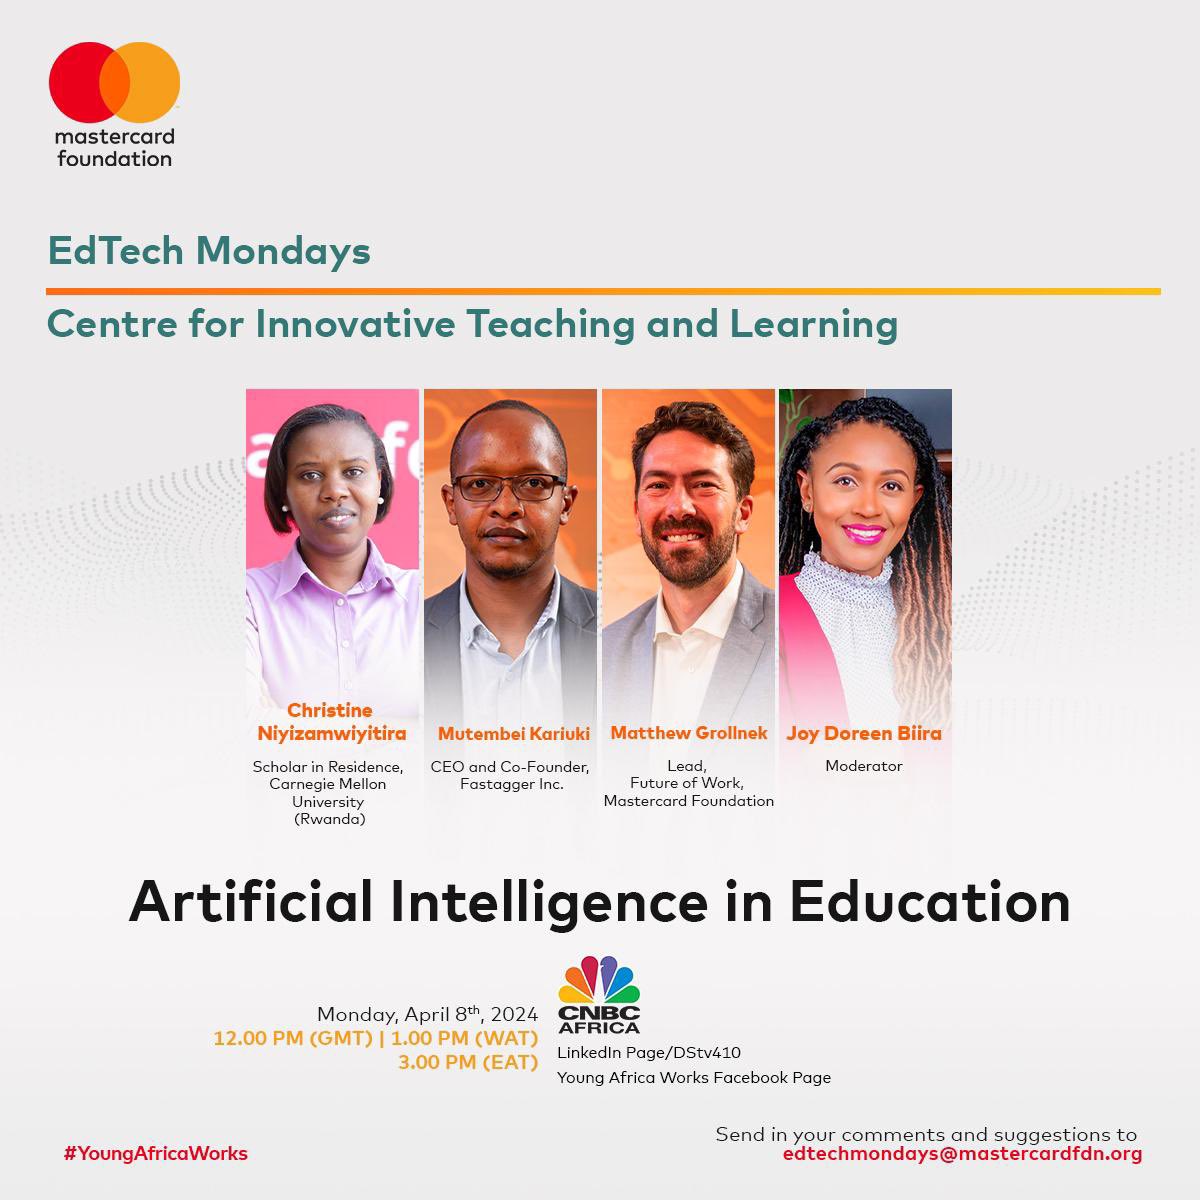 How are we conceptualizing AI in education in Africa? This April, #EdTechMondays Africa explores the use of Artificial Intelligence in Education. Join us today at 3pm EAT on @cnbcafrica (LinkedIn live stream/dstv410) and on the @MastercardFoundation #YoungAfricaWorks Facebook…